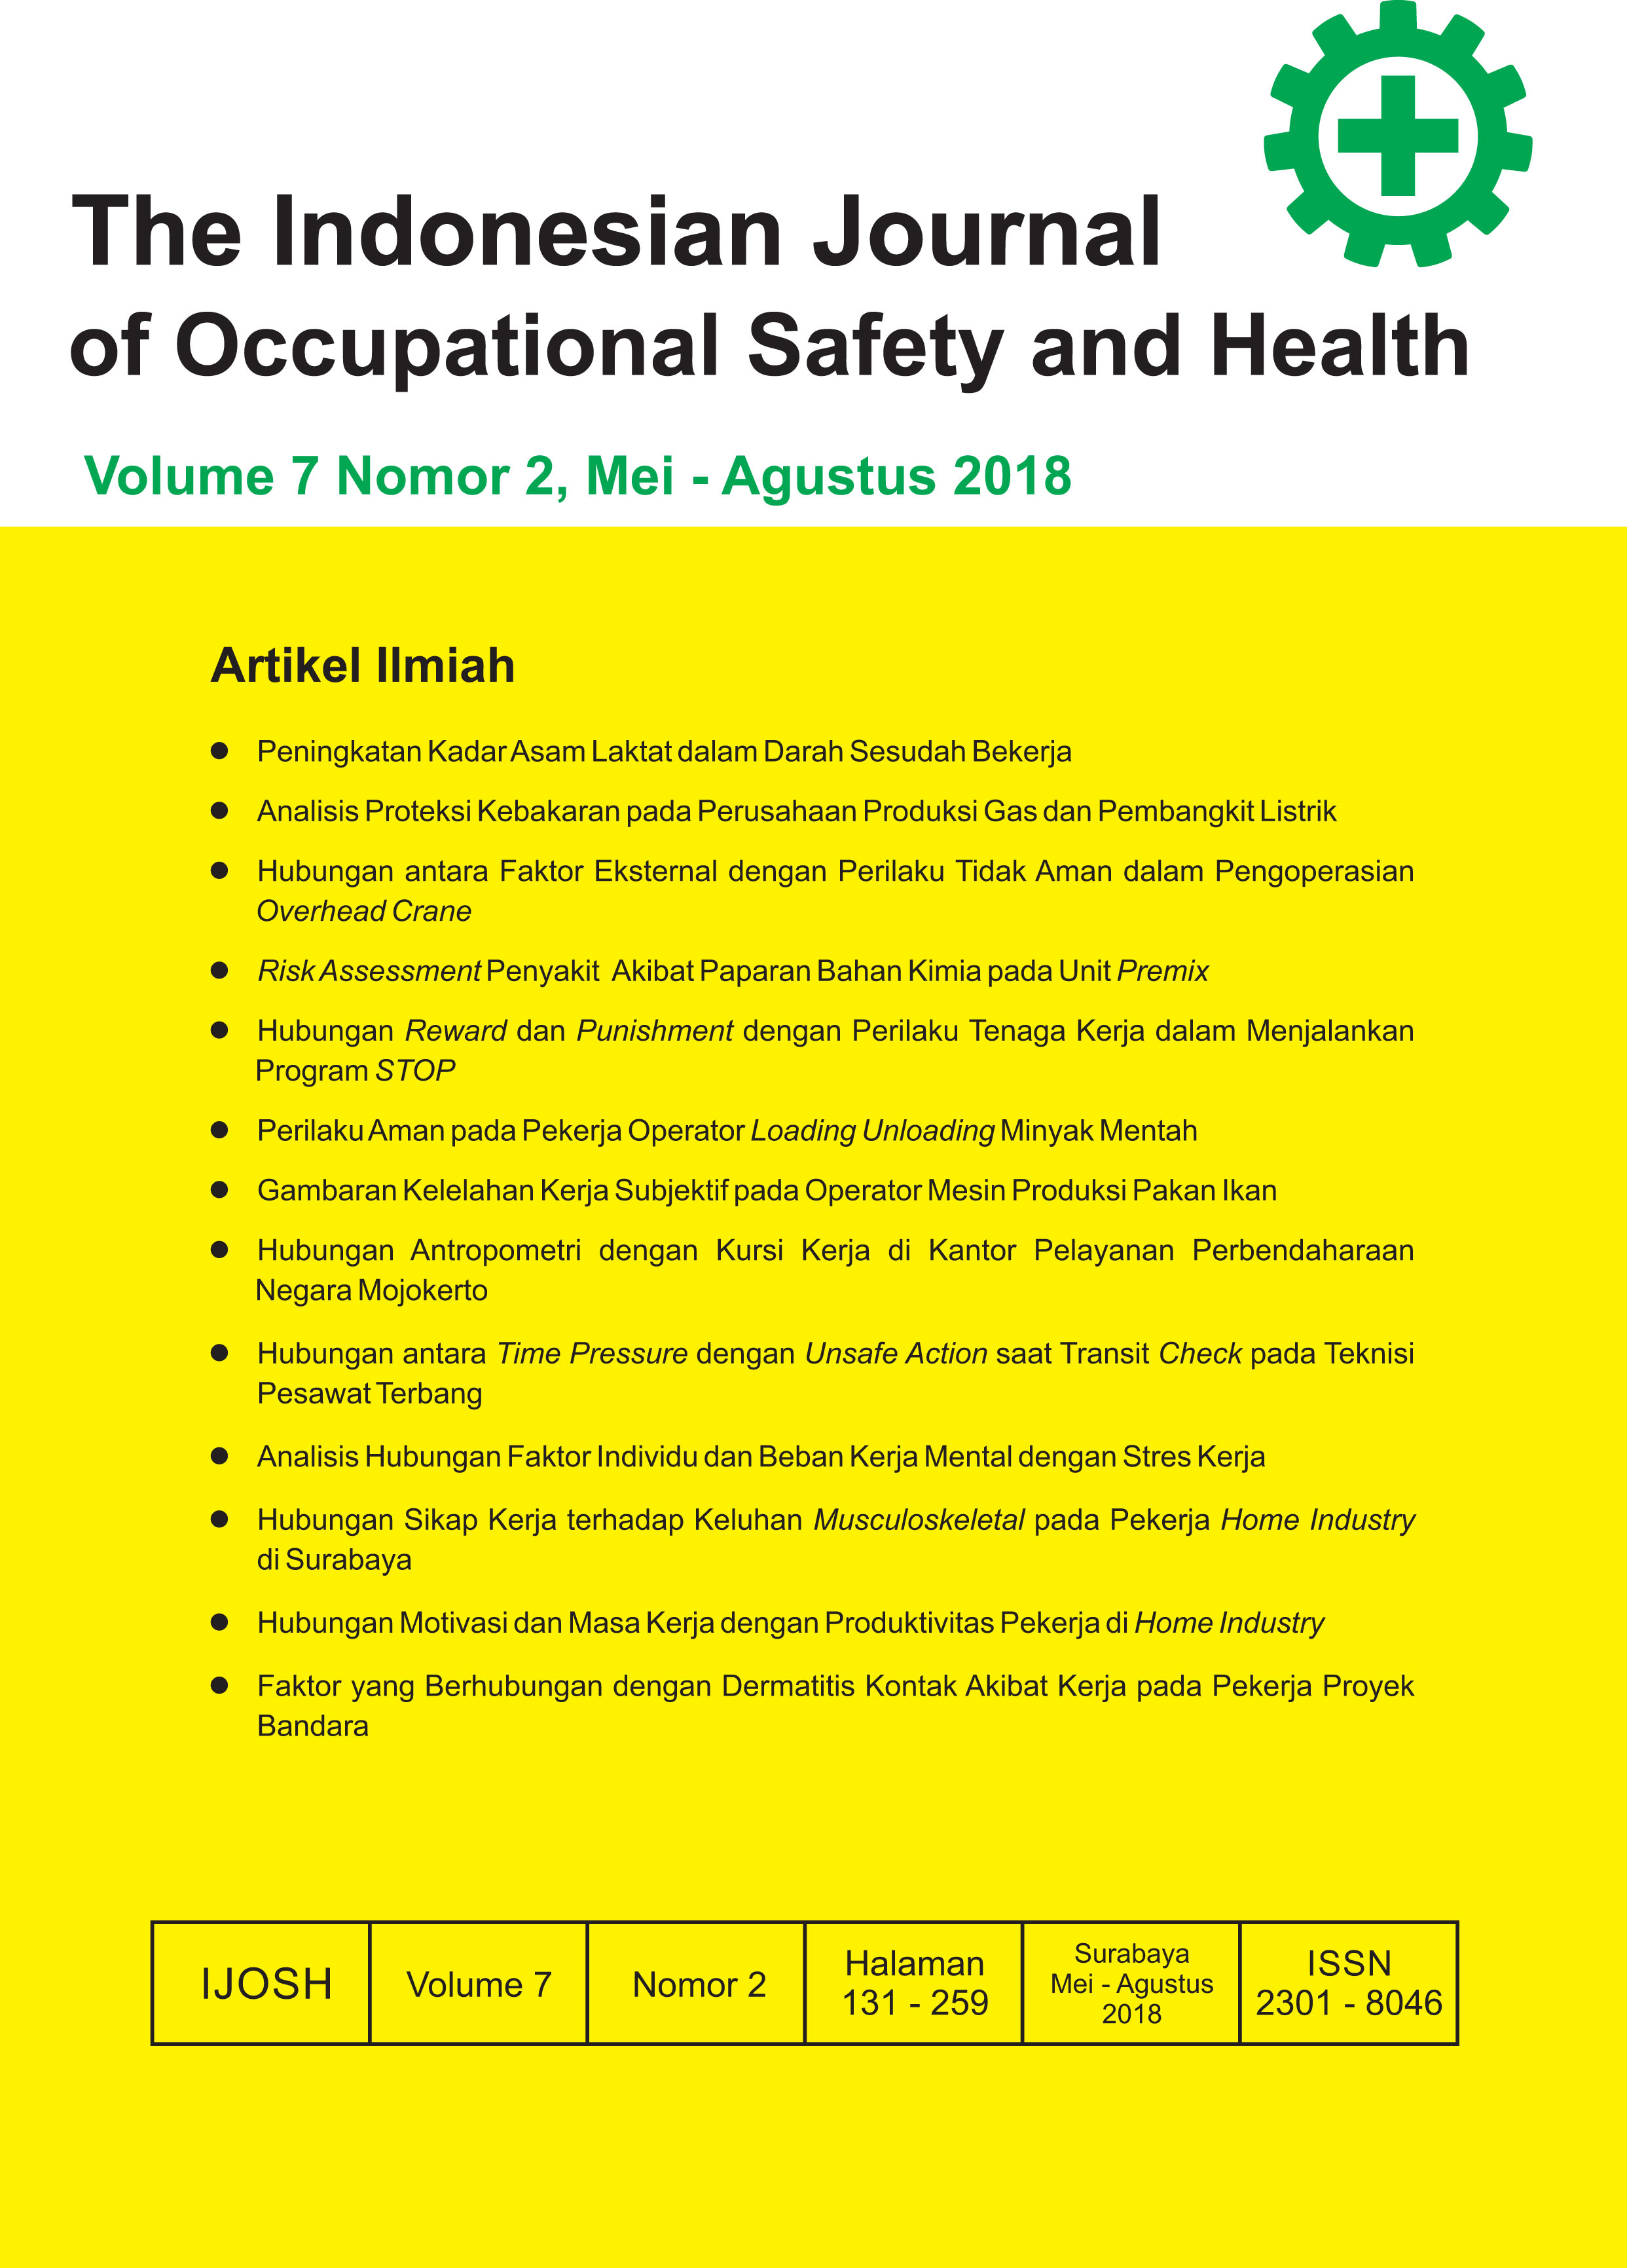 						View Vol. 7 No. 2 (2018): The Indonesian Journal of Occupational Safety and Health
					